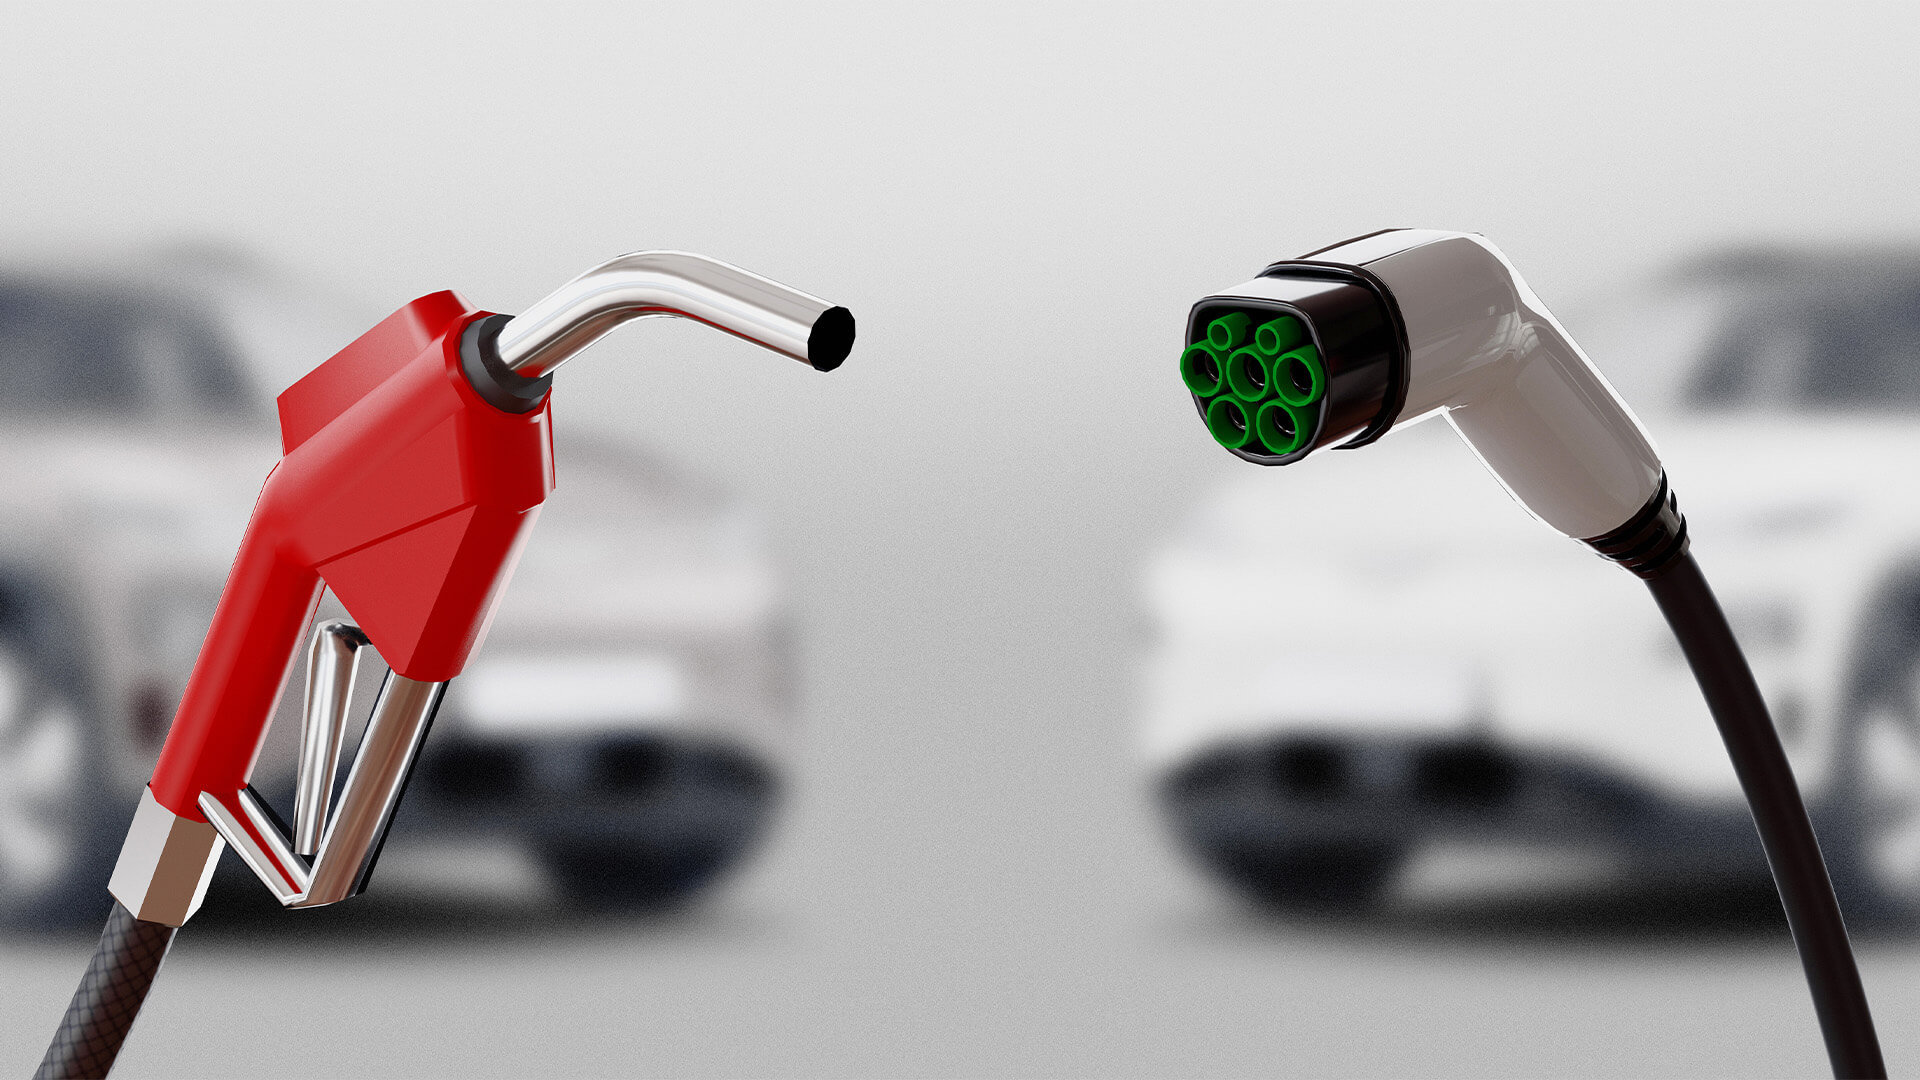 Left side shows a petrol pump with a petrol car in the background, and the right side shows an electric charger with an electric car in the background